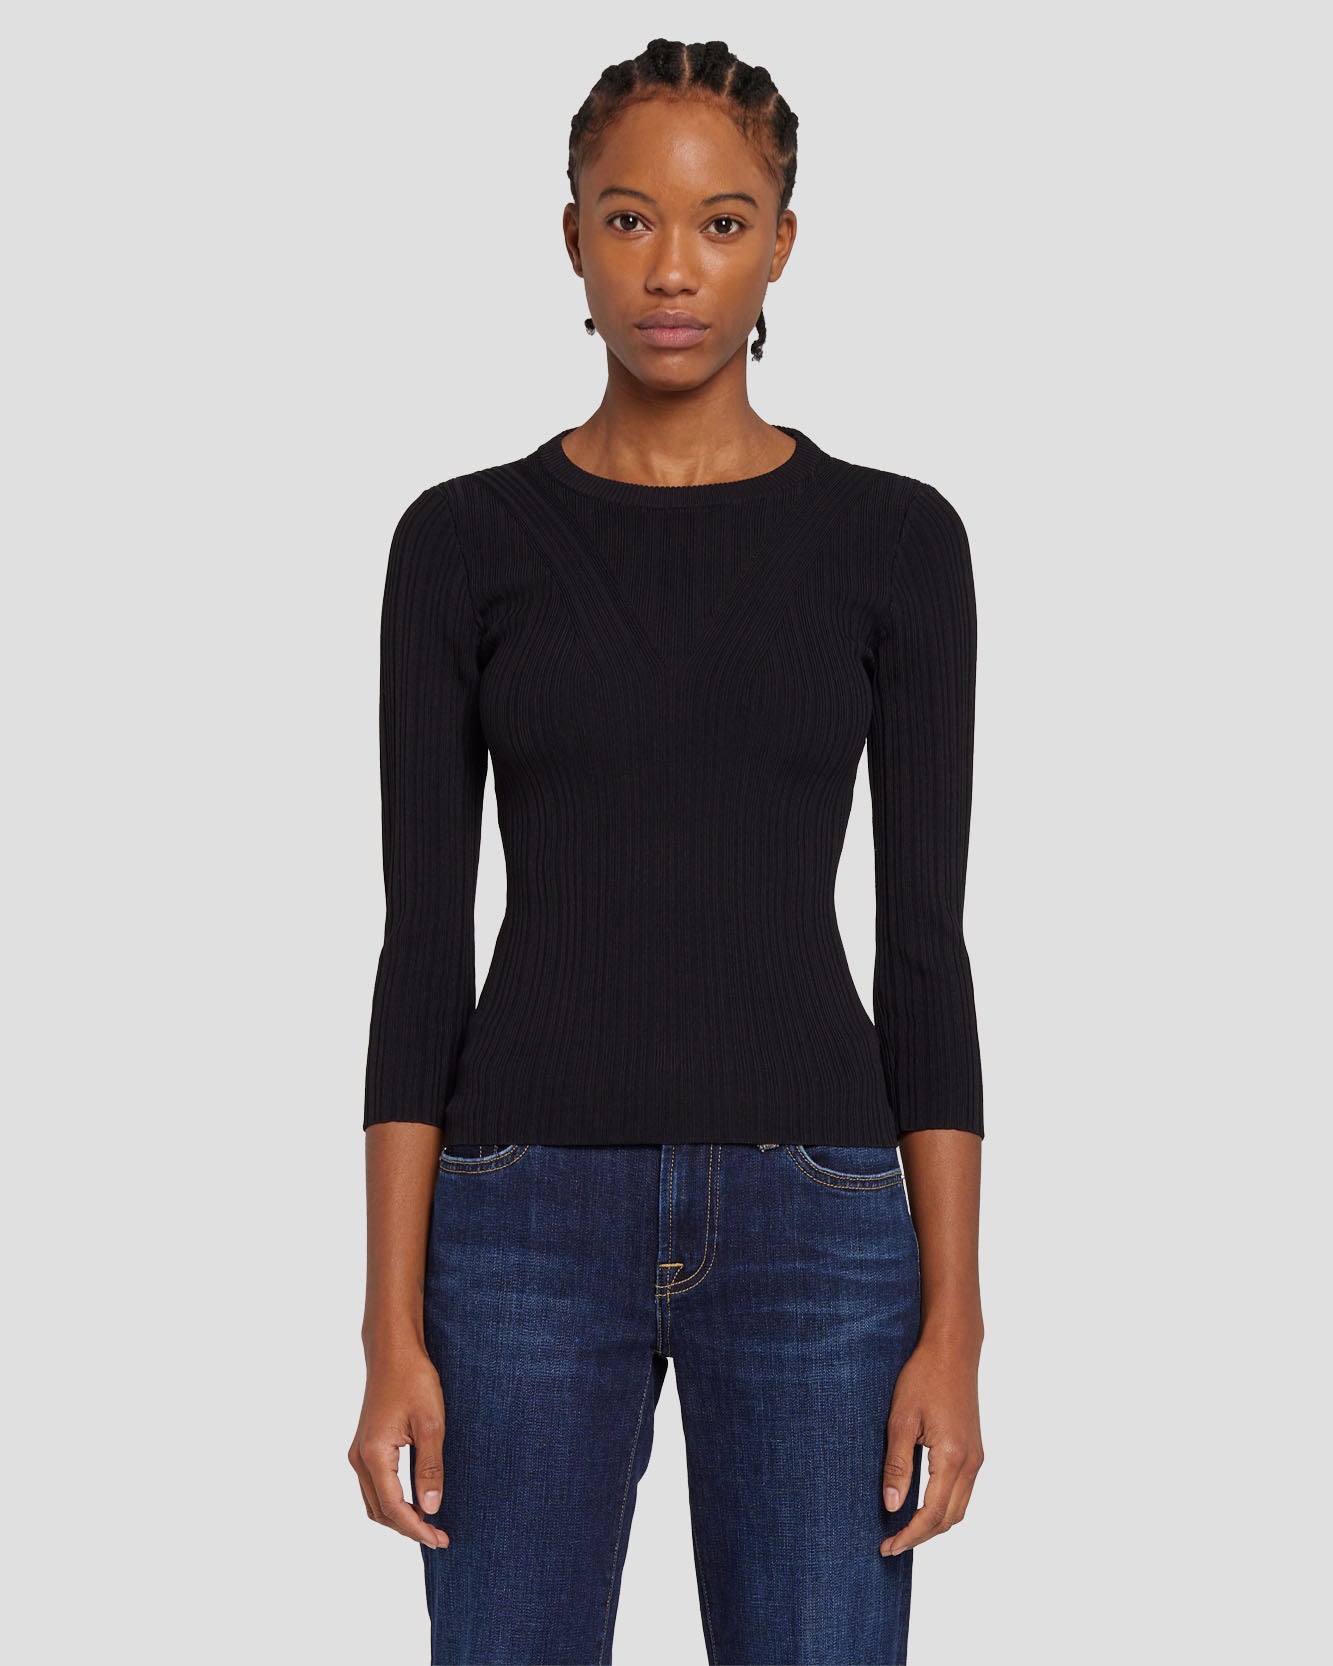 Open Back Knit Top in Black | 7 For All Mankind